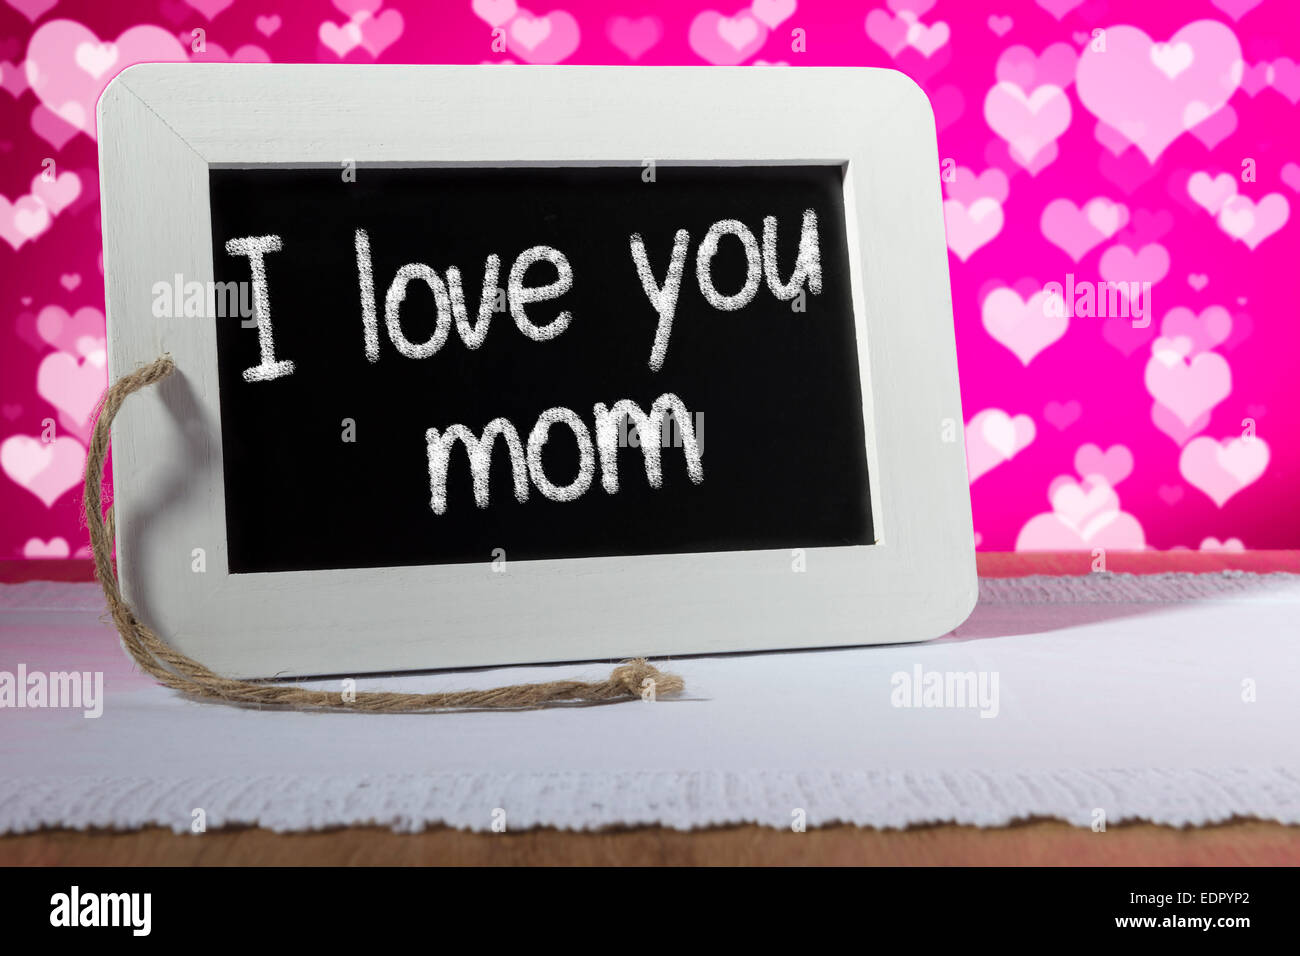 Image of a slate blackboard with chalk message I love you mom on pink background Stock Photo